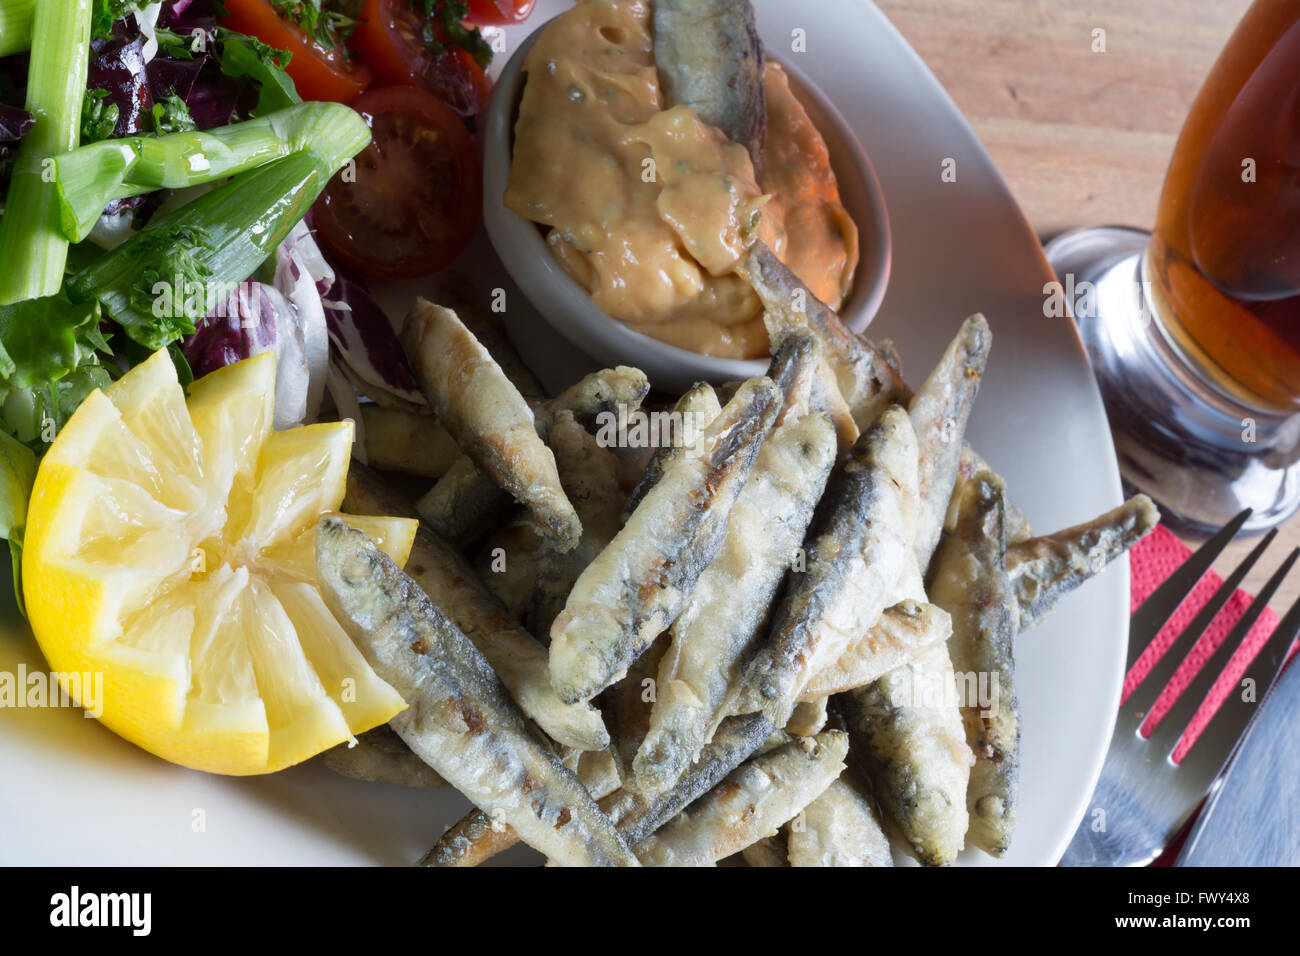 An Entree dish from an English pub/bar menu of fried Whitebait and Marie Rose sauce with a side salad and glass of beer/ale. Stock Photo